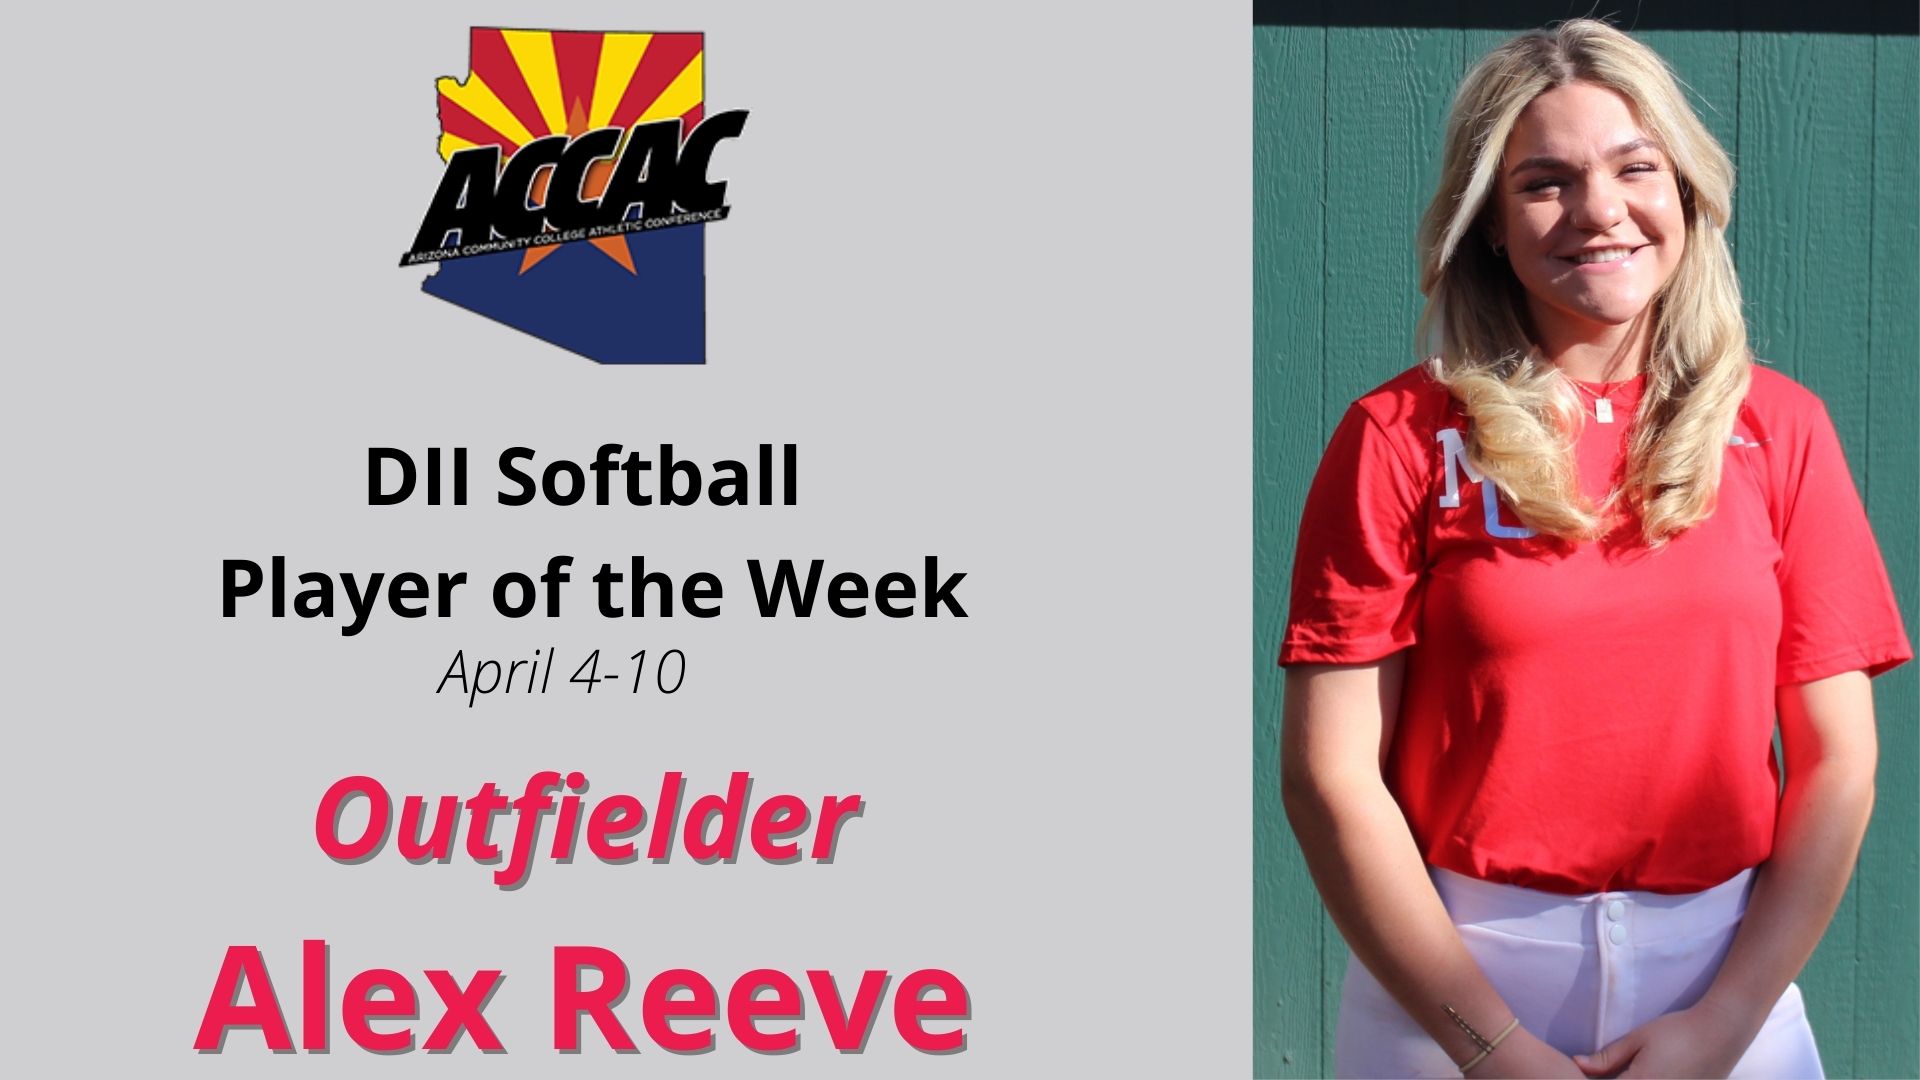 Alex Reeve Earns Second ACCAC DII Softball Player of the Week Award